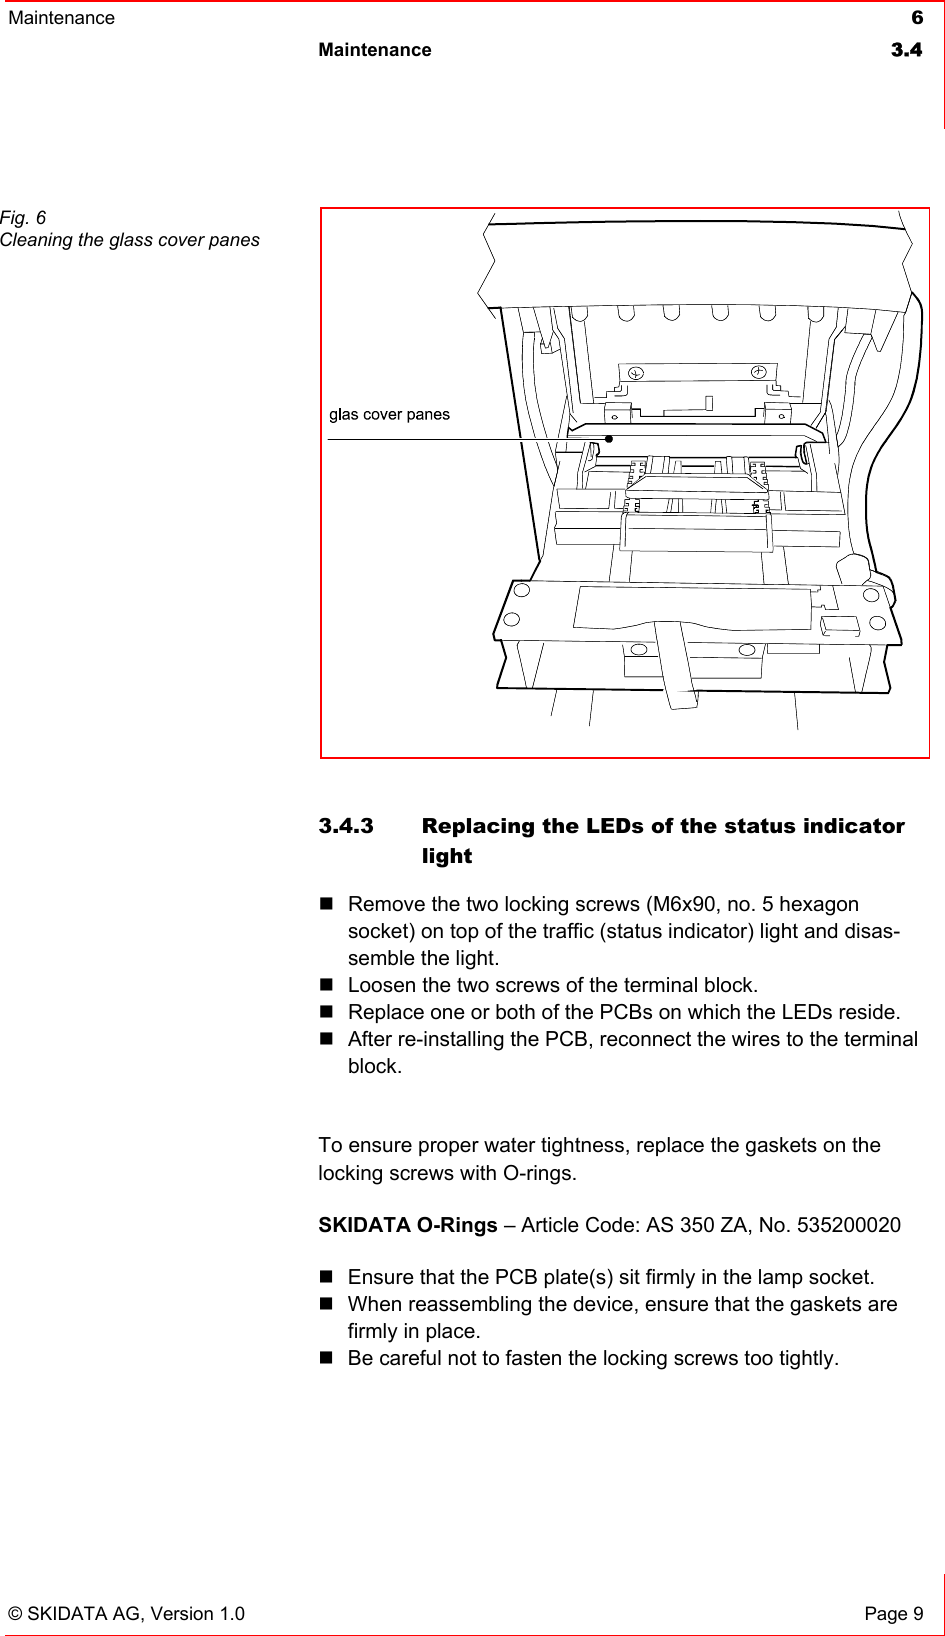 Maintenance  6 Maintenance 3.4   © SKIDATA AG, Version 1.0  Page 9  3.4.3  Replacing the LEDs of the status indicator light  Remove the two locking screws (M6x90, no. 5 hexagon socket) on top of the traffic (status indicator) light and disas-semble the light.  Loosen the two screws of the terminal block.  Replace one or both of the PCBs on which the LEDs reside.  After re-installing the PCB, reconnect the wires to the terminal block.  To ensure proper water tightness, replace the gaskets on the locking screws with O-rings. SKIDATA O-Rings – Article Code: AS 350 ZA, No. 535200020  Ensure that the PCB plate(s) sit firmly in the lamp socket.   When reassembling the device, ensure that the gaskets are firmly in place.  Be careful not to fasten the locking screws too tightly.   Fig. 6 Cleaning the glass cover panes 